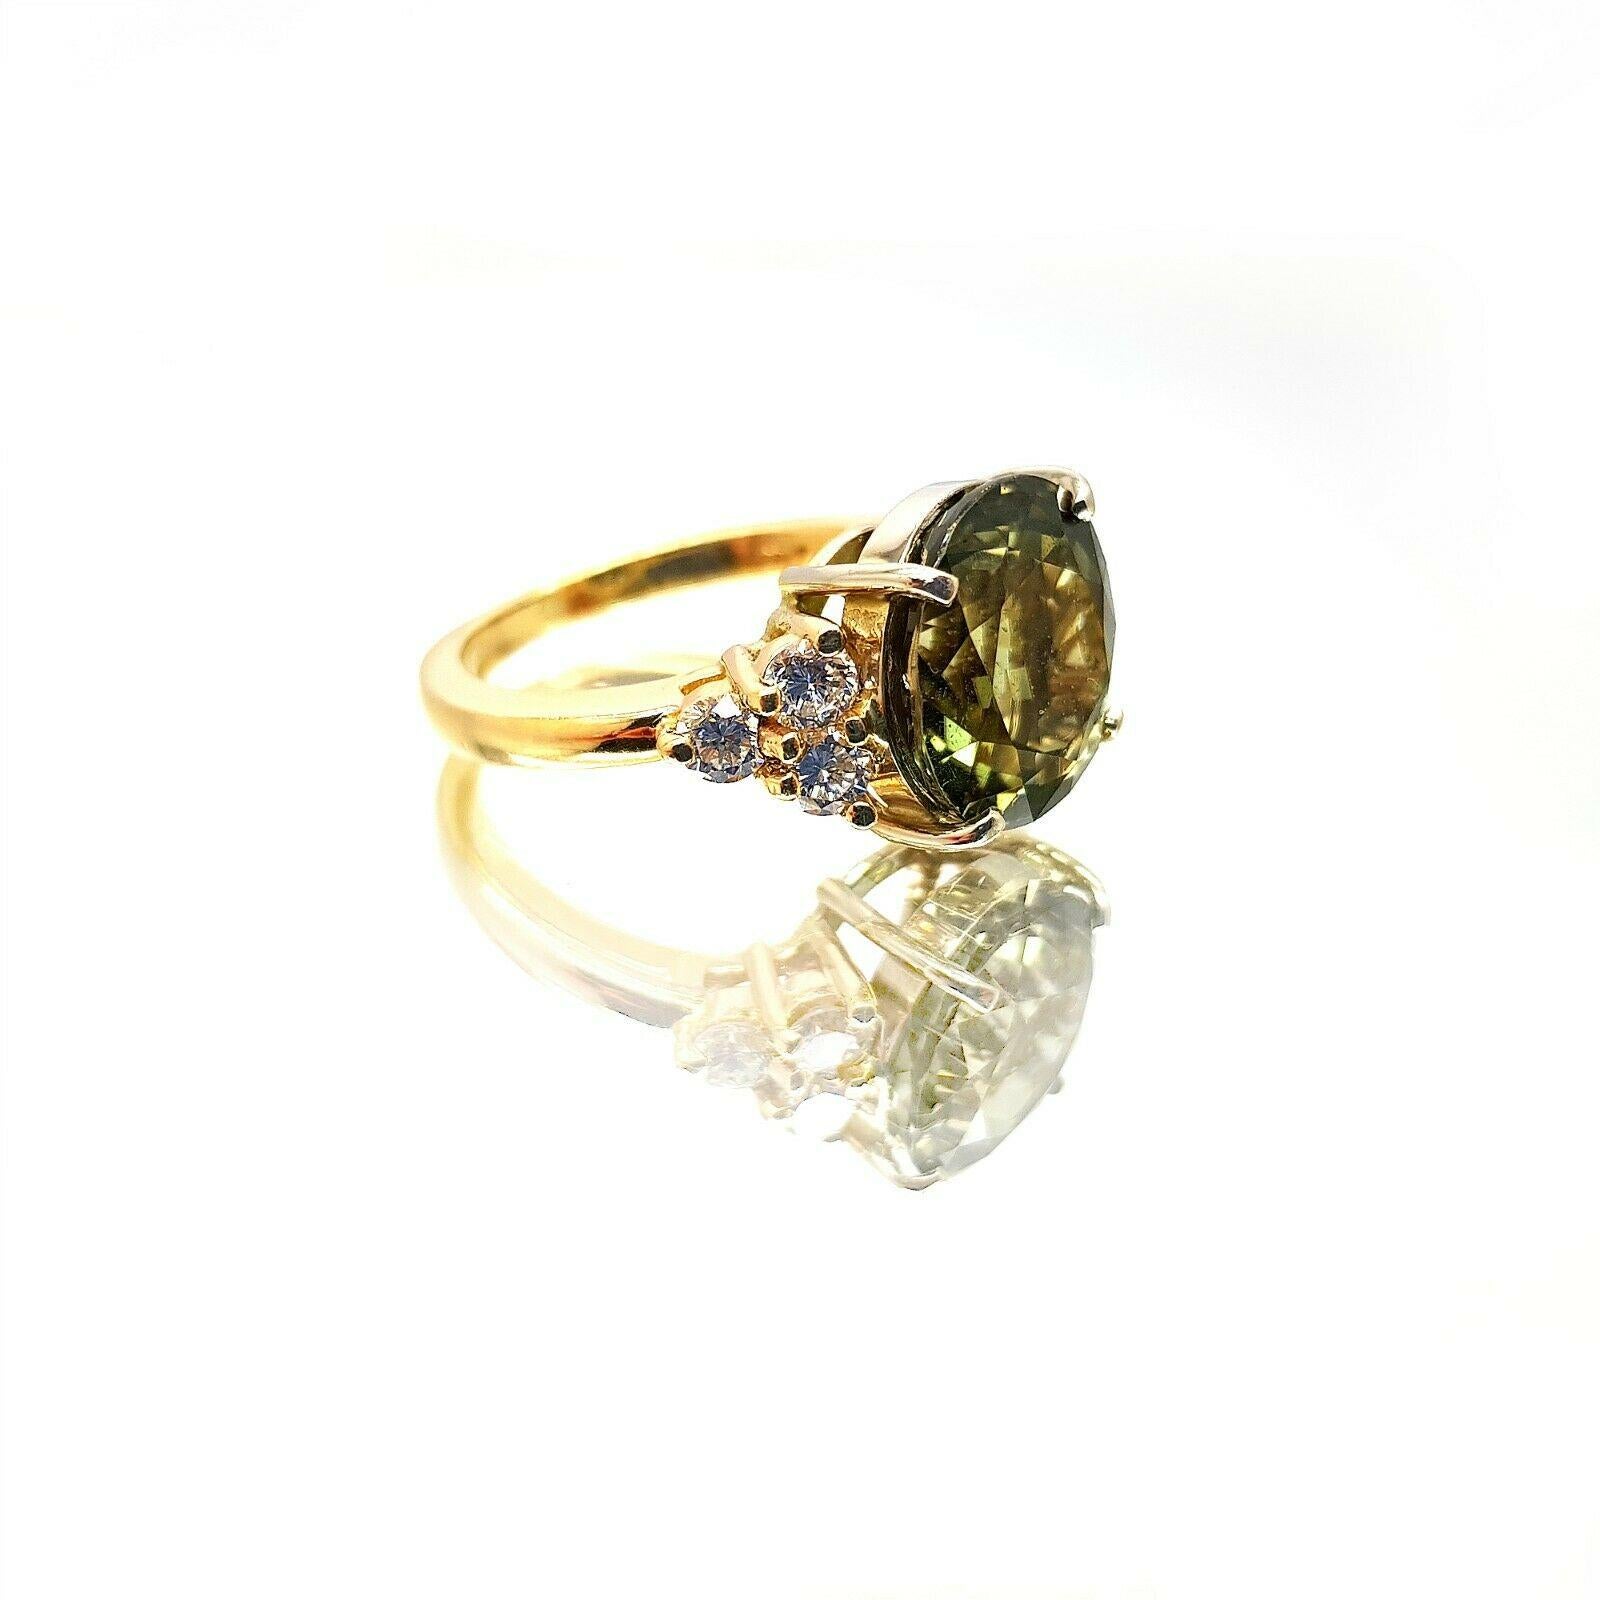  This is an 14k Yellow gold Tourmaline diamond ring. The main stone has the beautiful color of Green and is approximately 7.00 carat weight. It has a 6pcs round diamonds and has an approximately 0.60 carat total weight, H color and VS2 clarity. Its